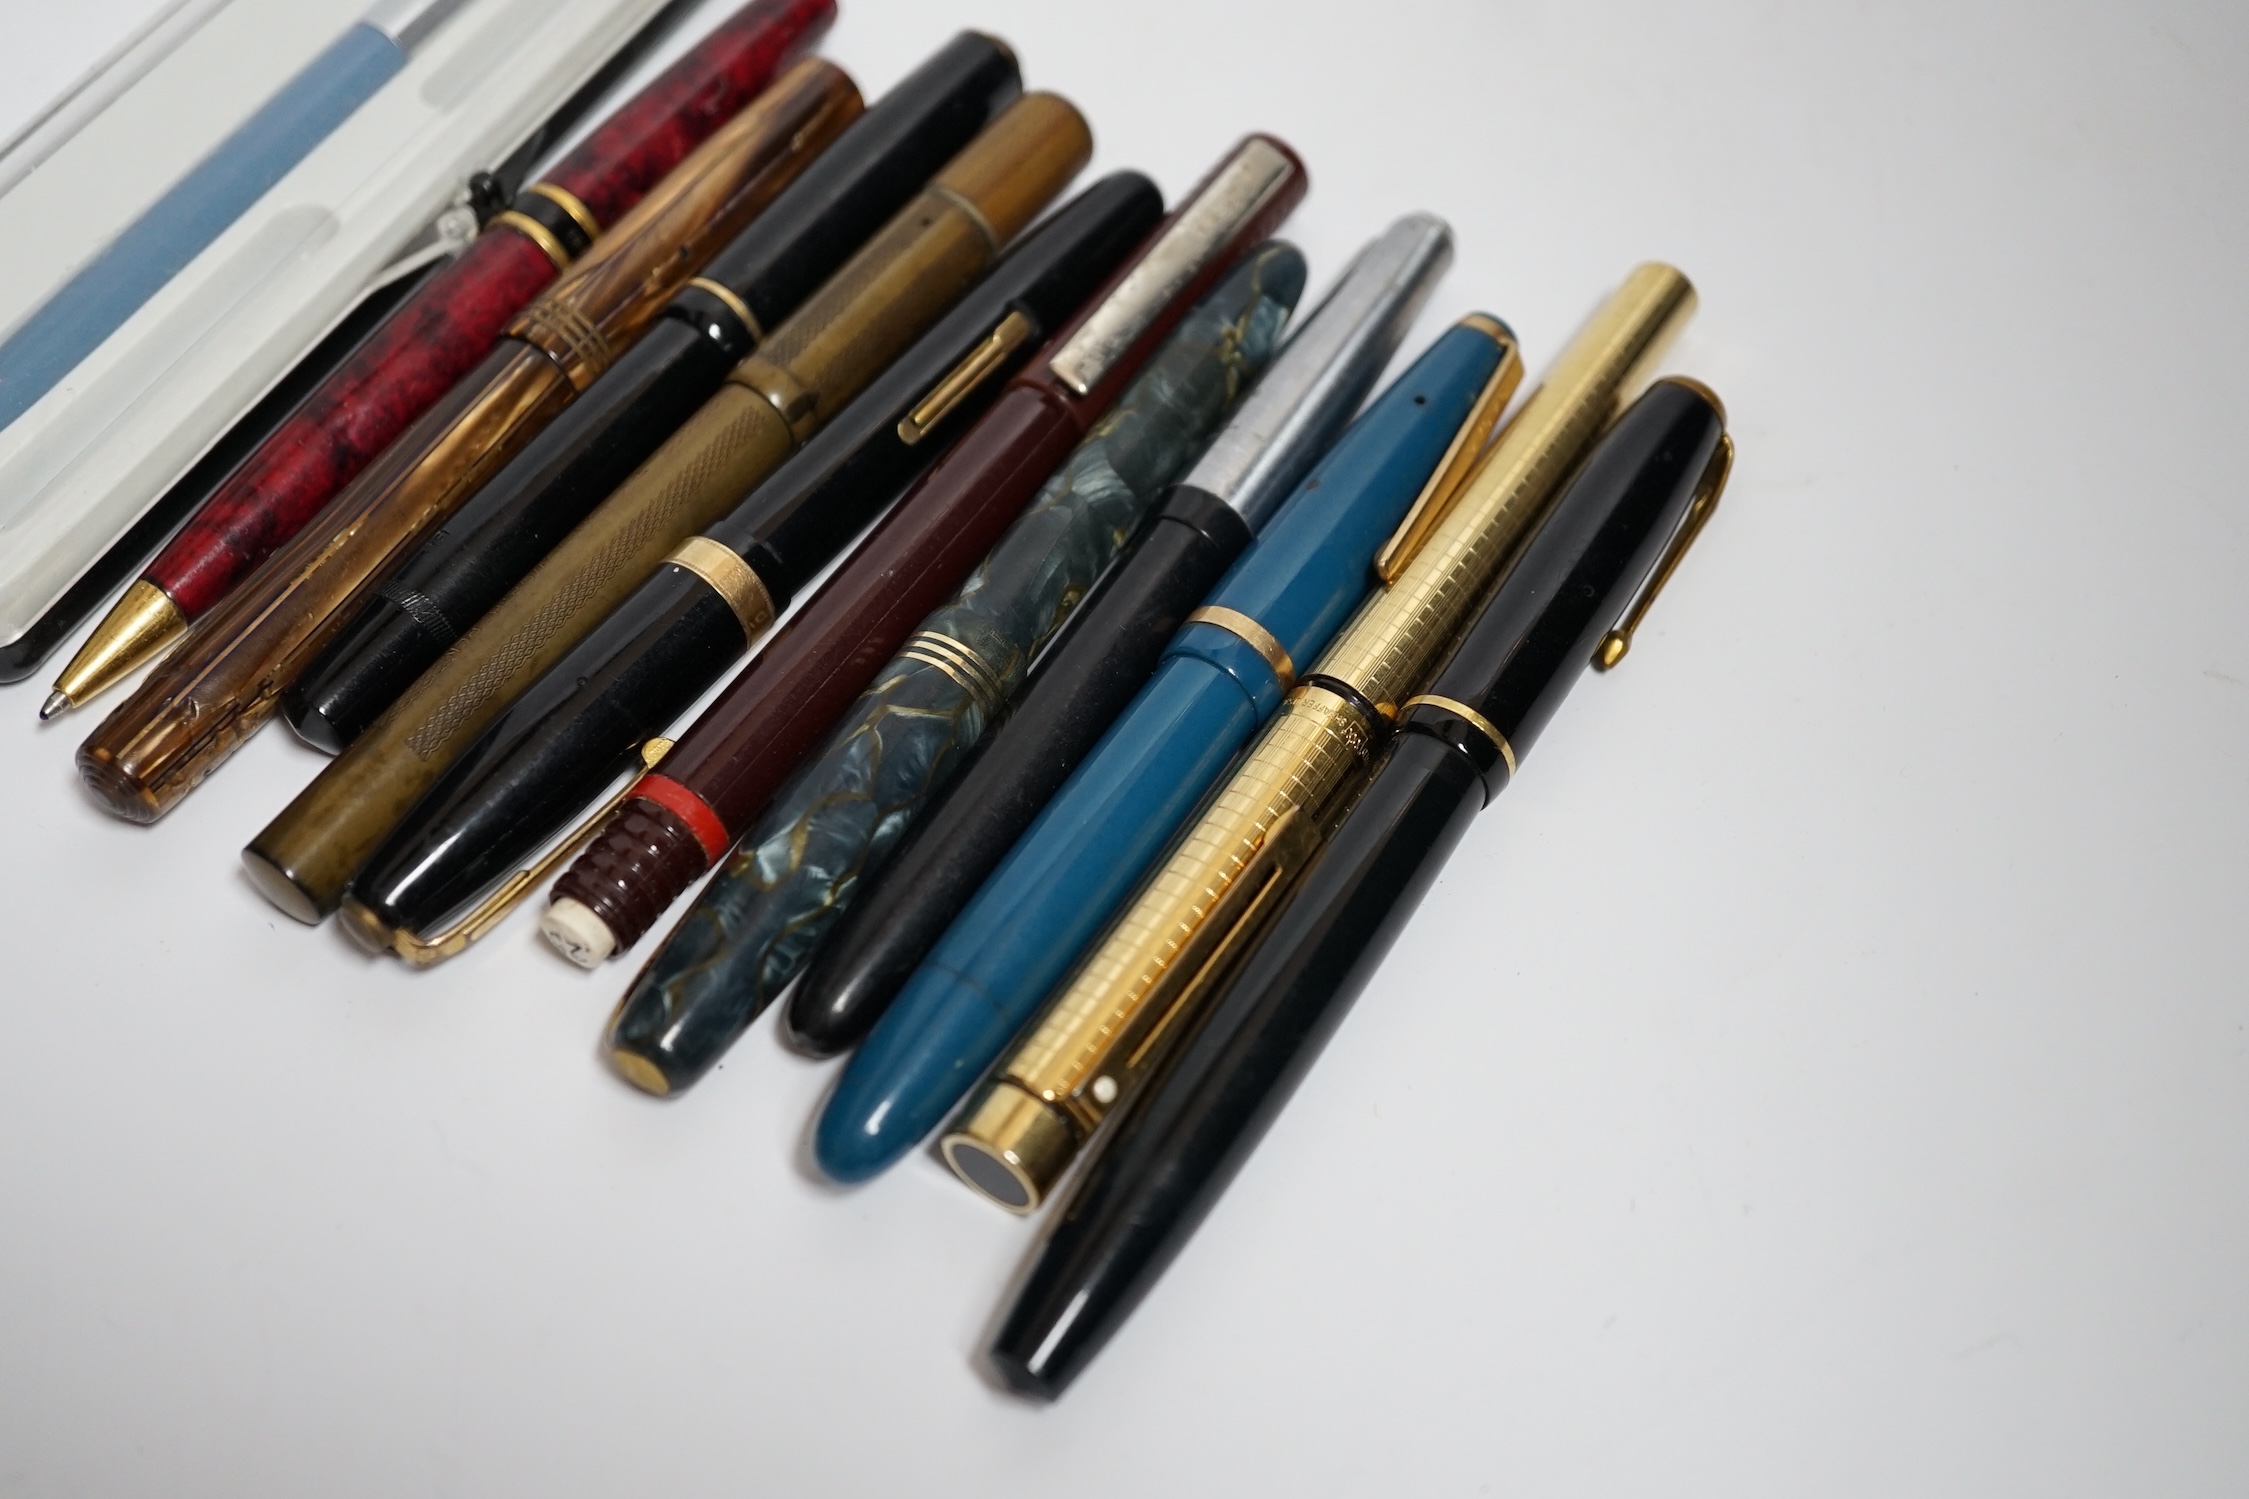 A quantity of fountain pens including Watermans and Sheaffer